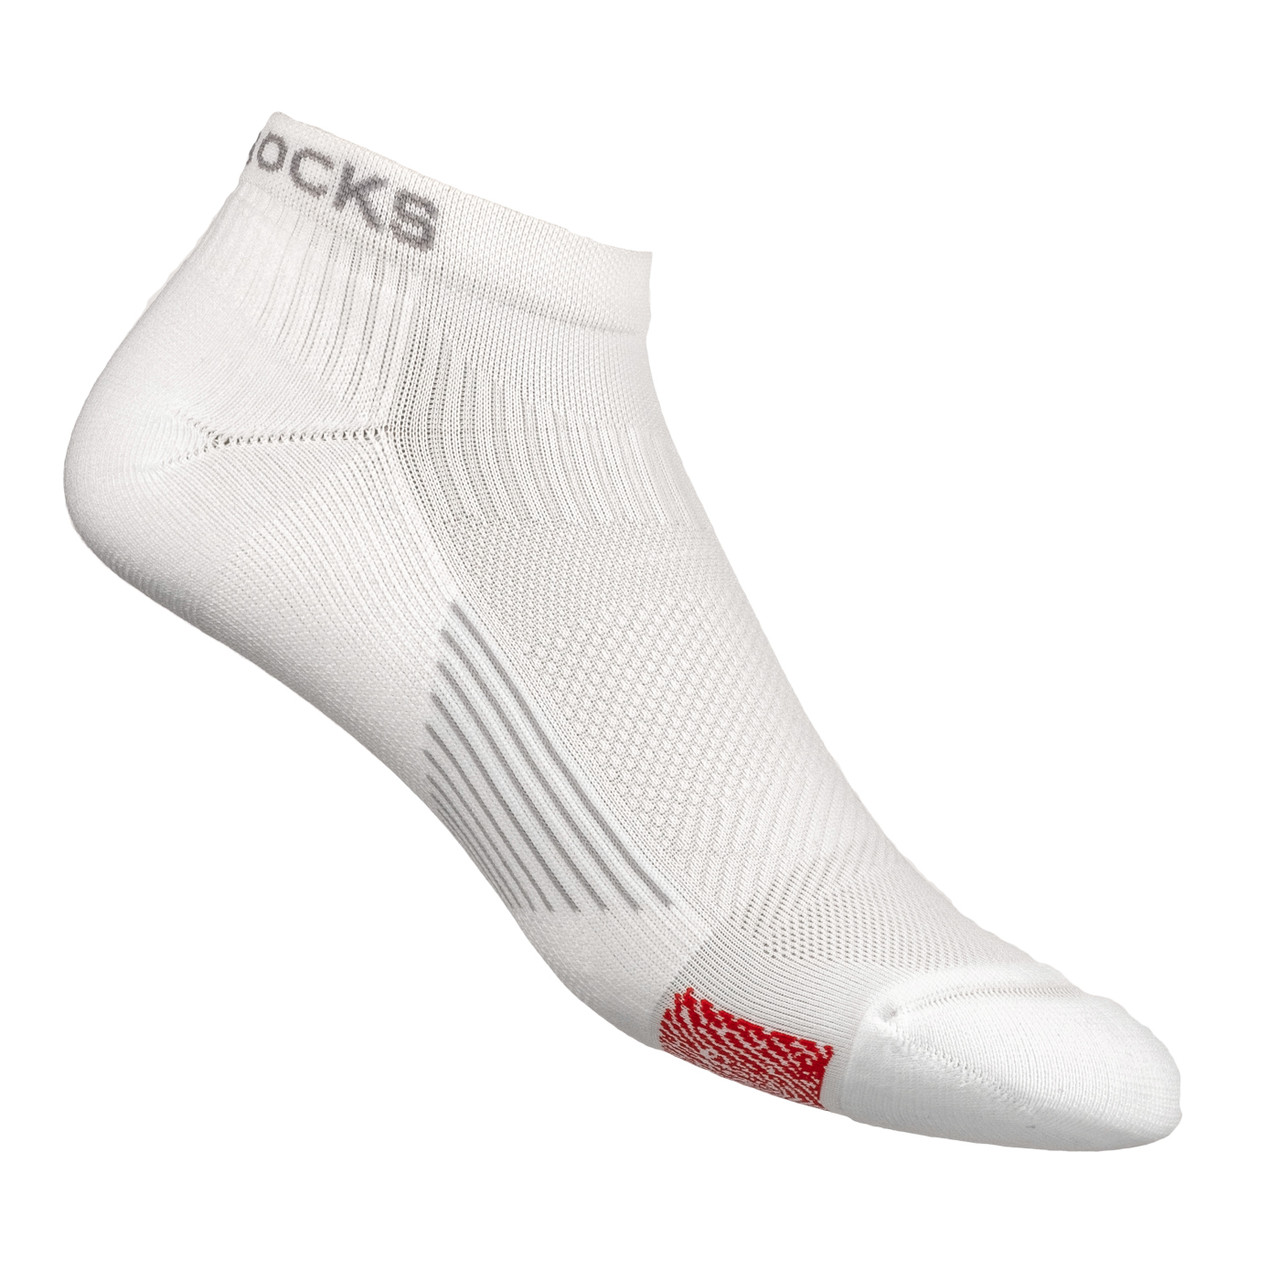 Biowin Athletic No Show Socks - Dr Techlove